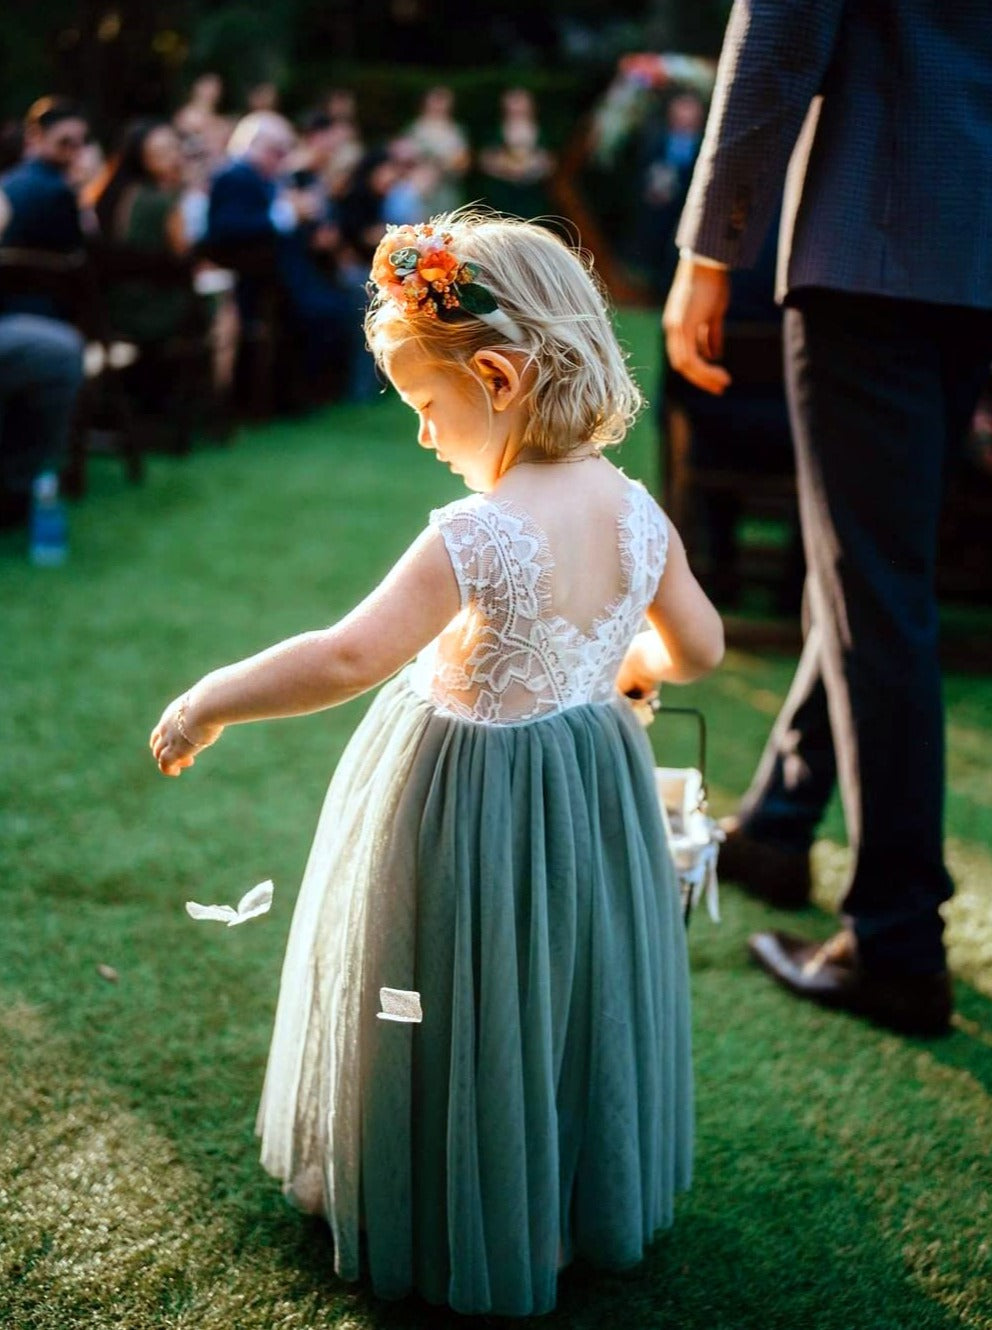 2Bunnies Flower Girl Dress Rose Lace Back A-Line Sleeveless Straight Tulle Maxi (Sage) - 2BUNNIES